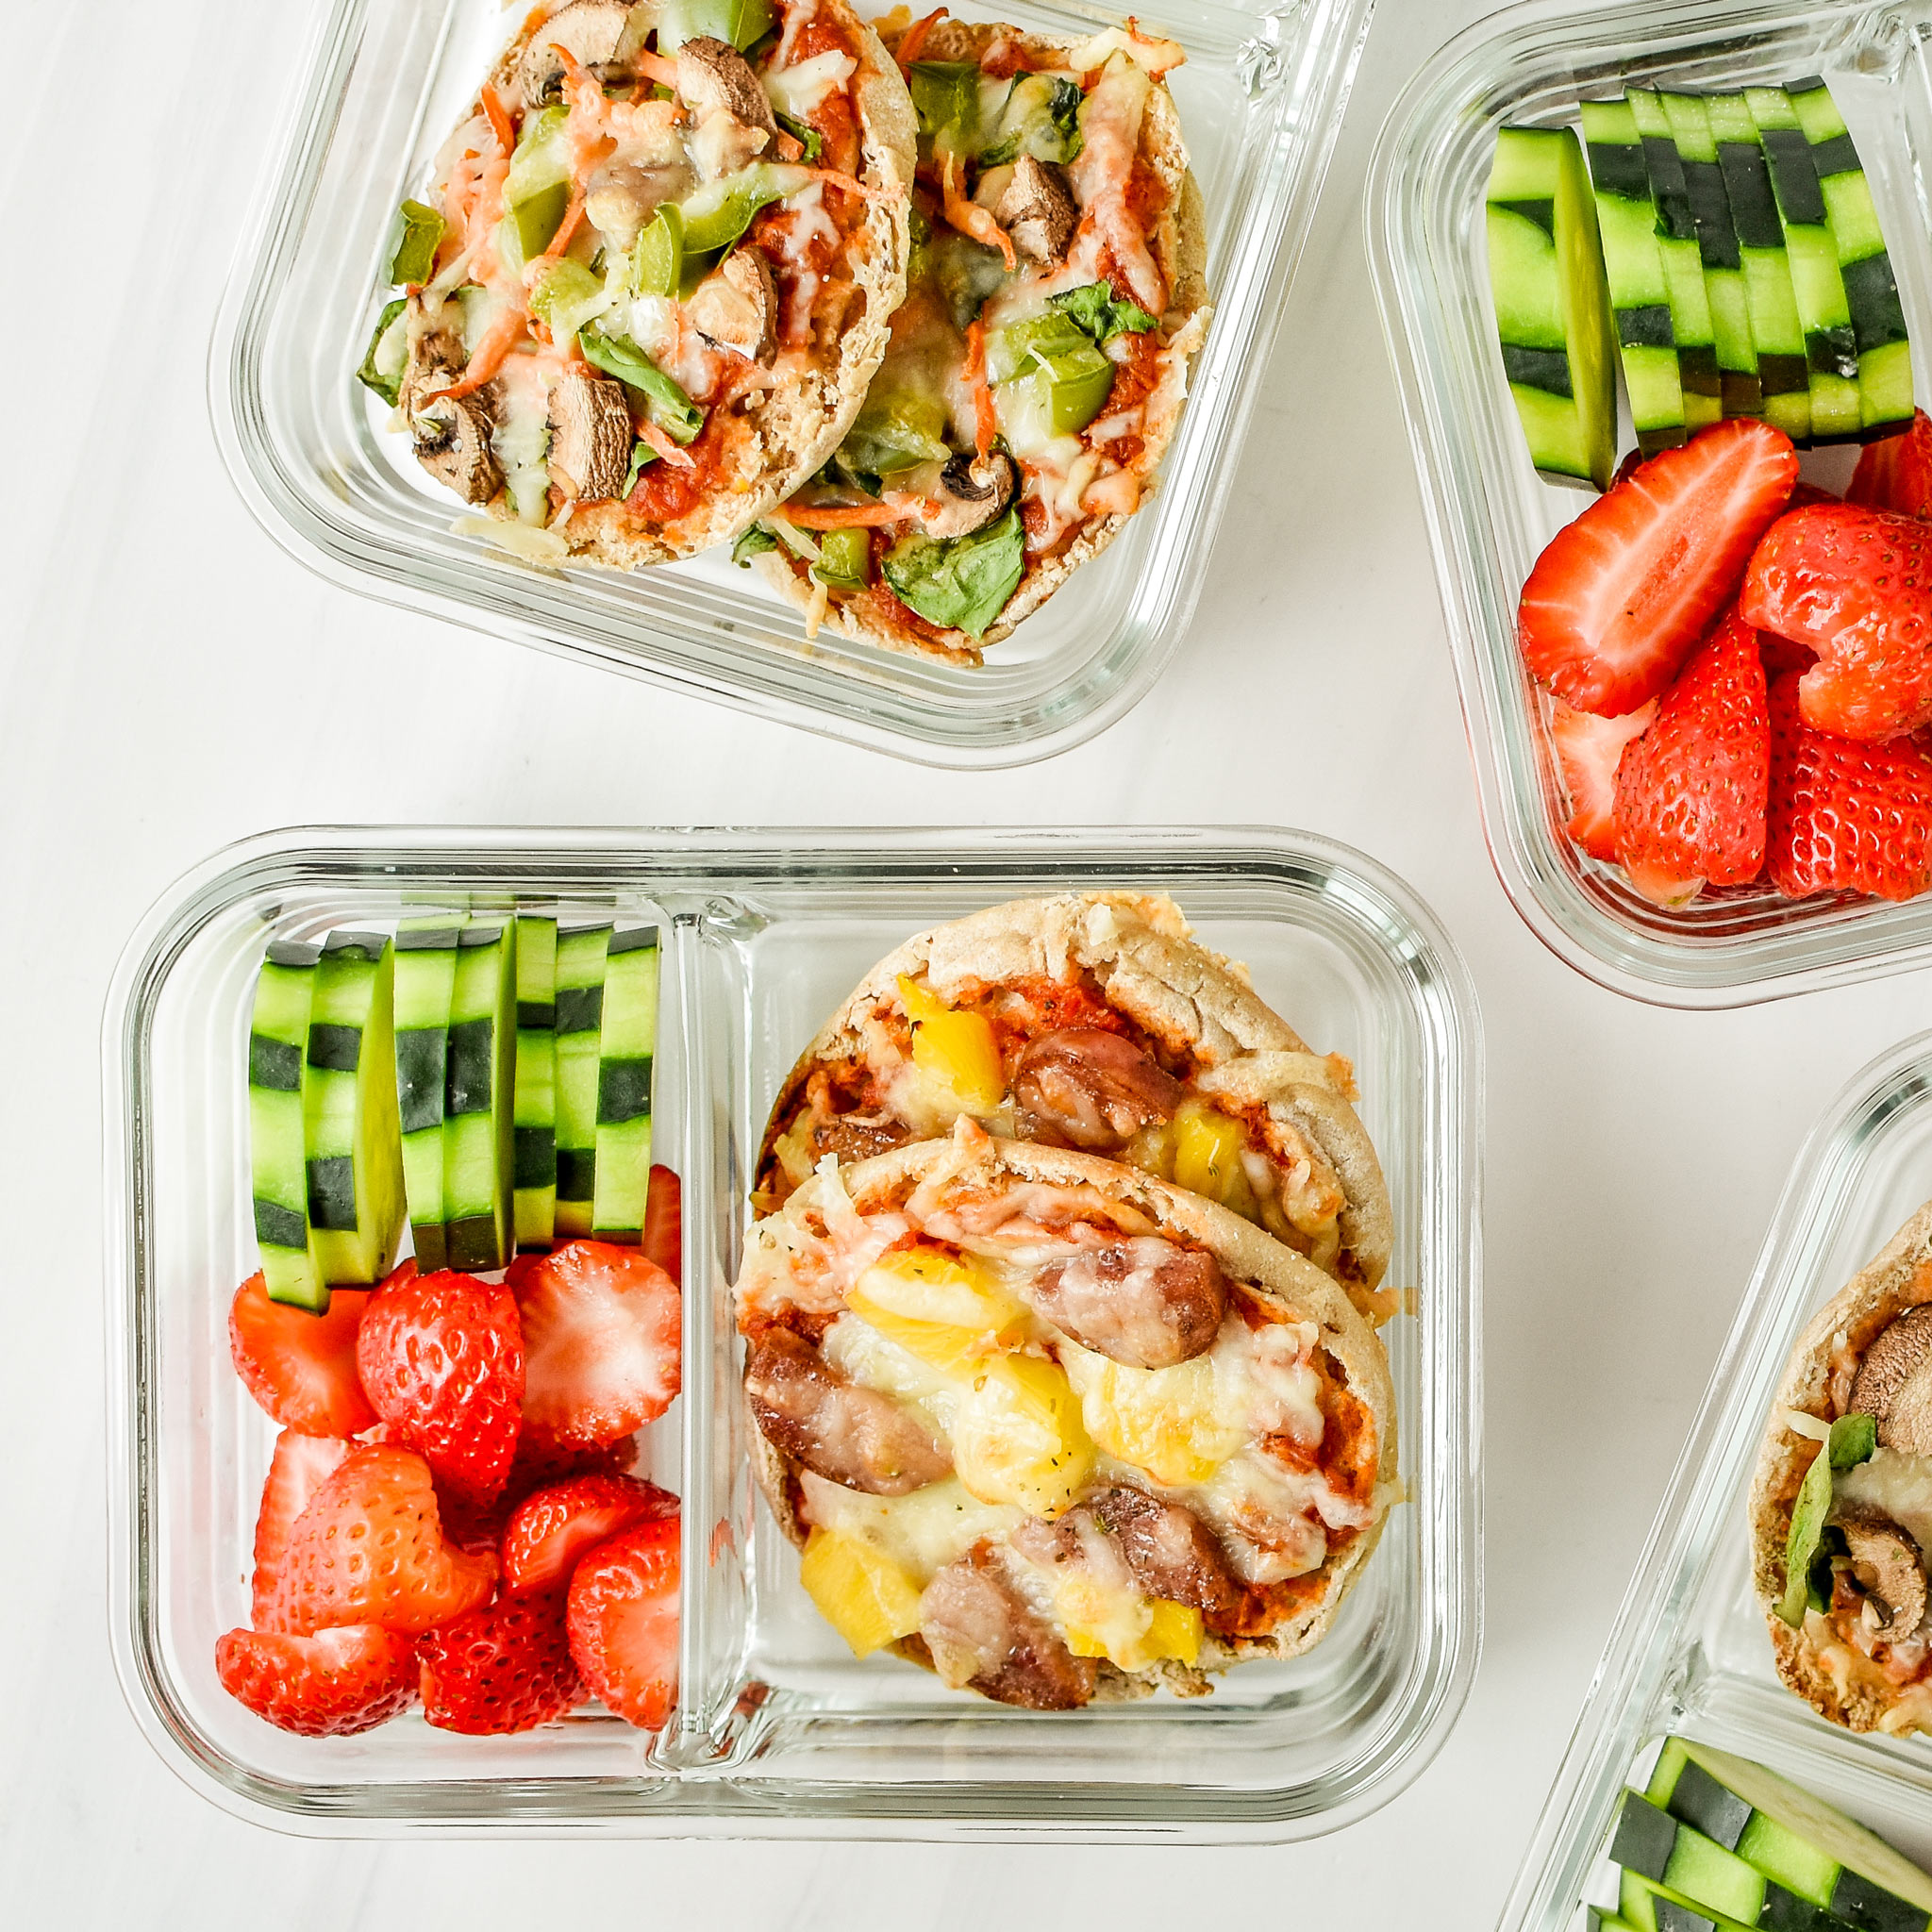 English muffin mini pizzas meal prep pictured from above in a meal prep container with fresh fruits and veggies.